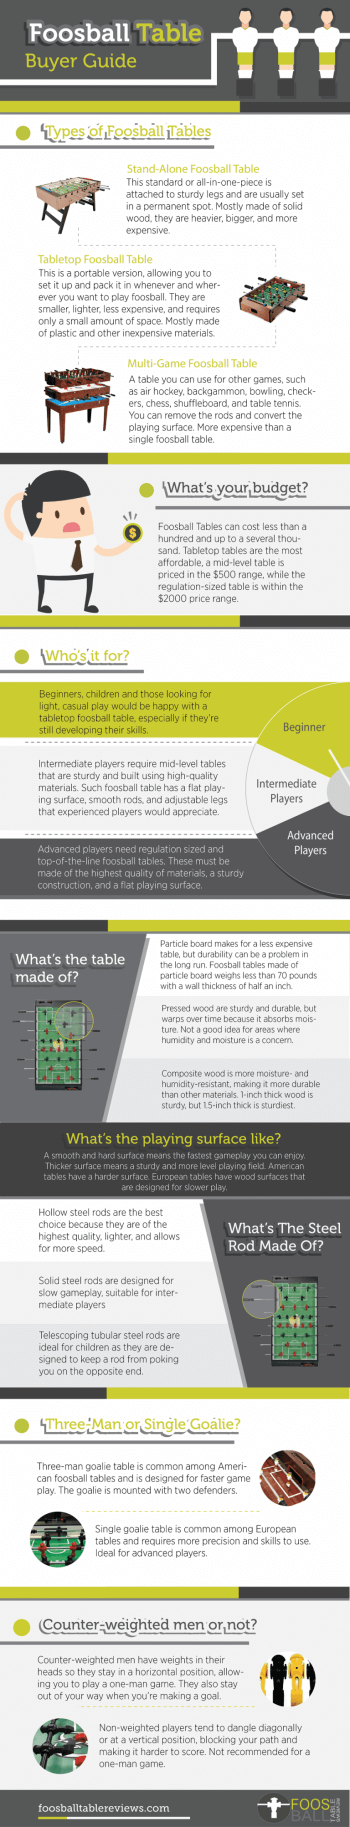 Foosball Table Buying Guide Infographic